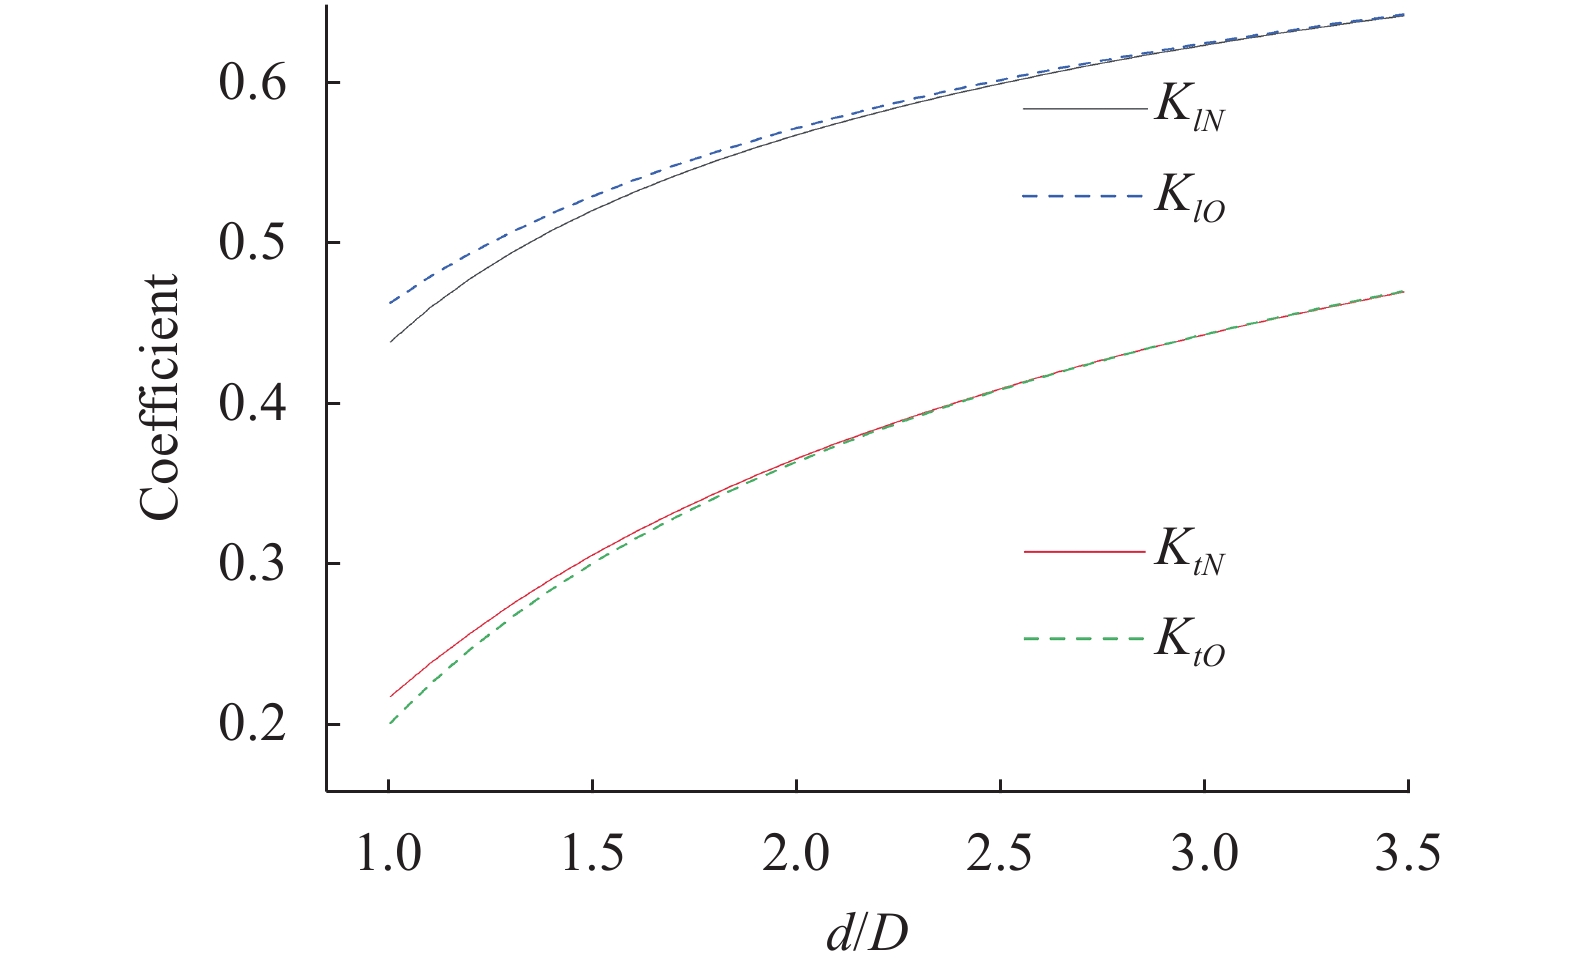 Comparison of the normalized differential coefficients. Dashed line: KlO and KtOfrom the traditional formulae, solid line: KlN and KtN from the new formulae